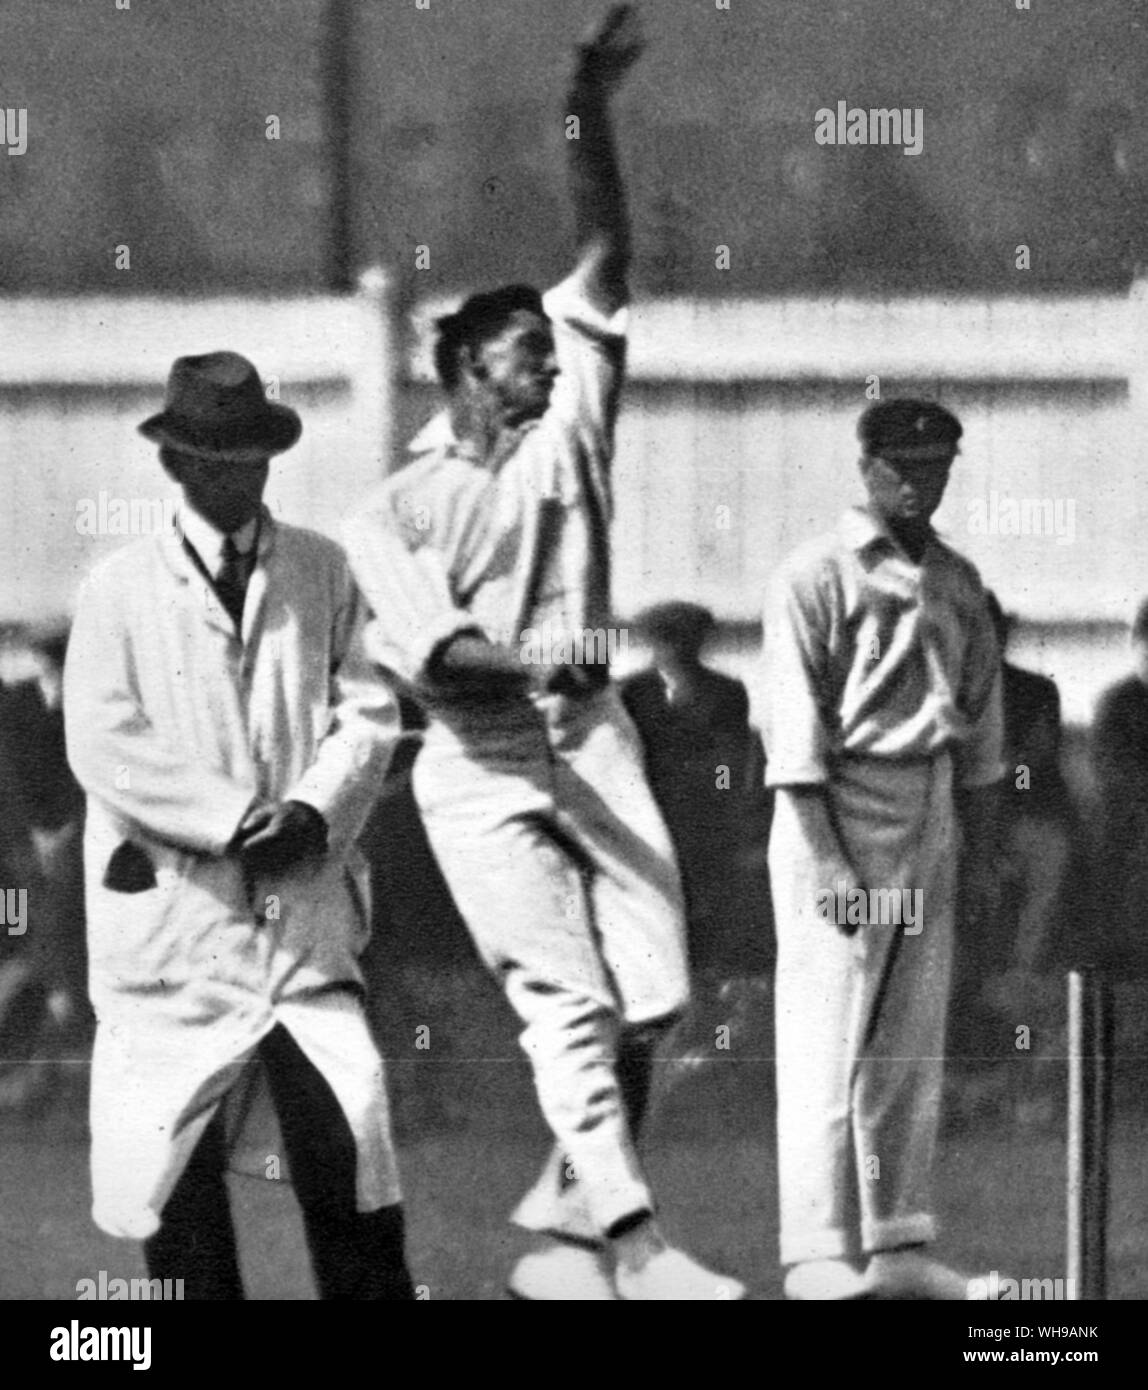 (Ted) E A McDonald 1892-1937 bowling against Leicester at the start of 1921 Australian tour. W Bardsley is at mid field Stock Photo